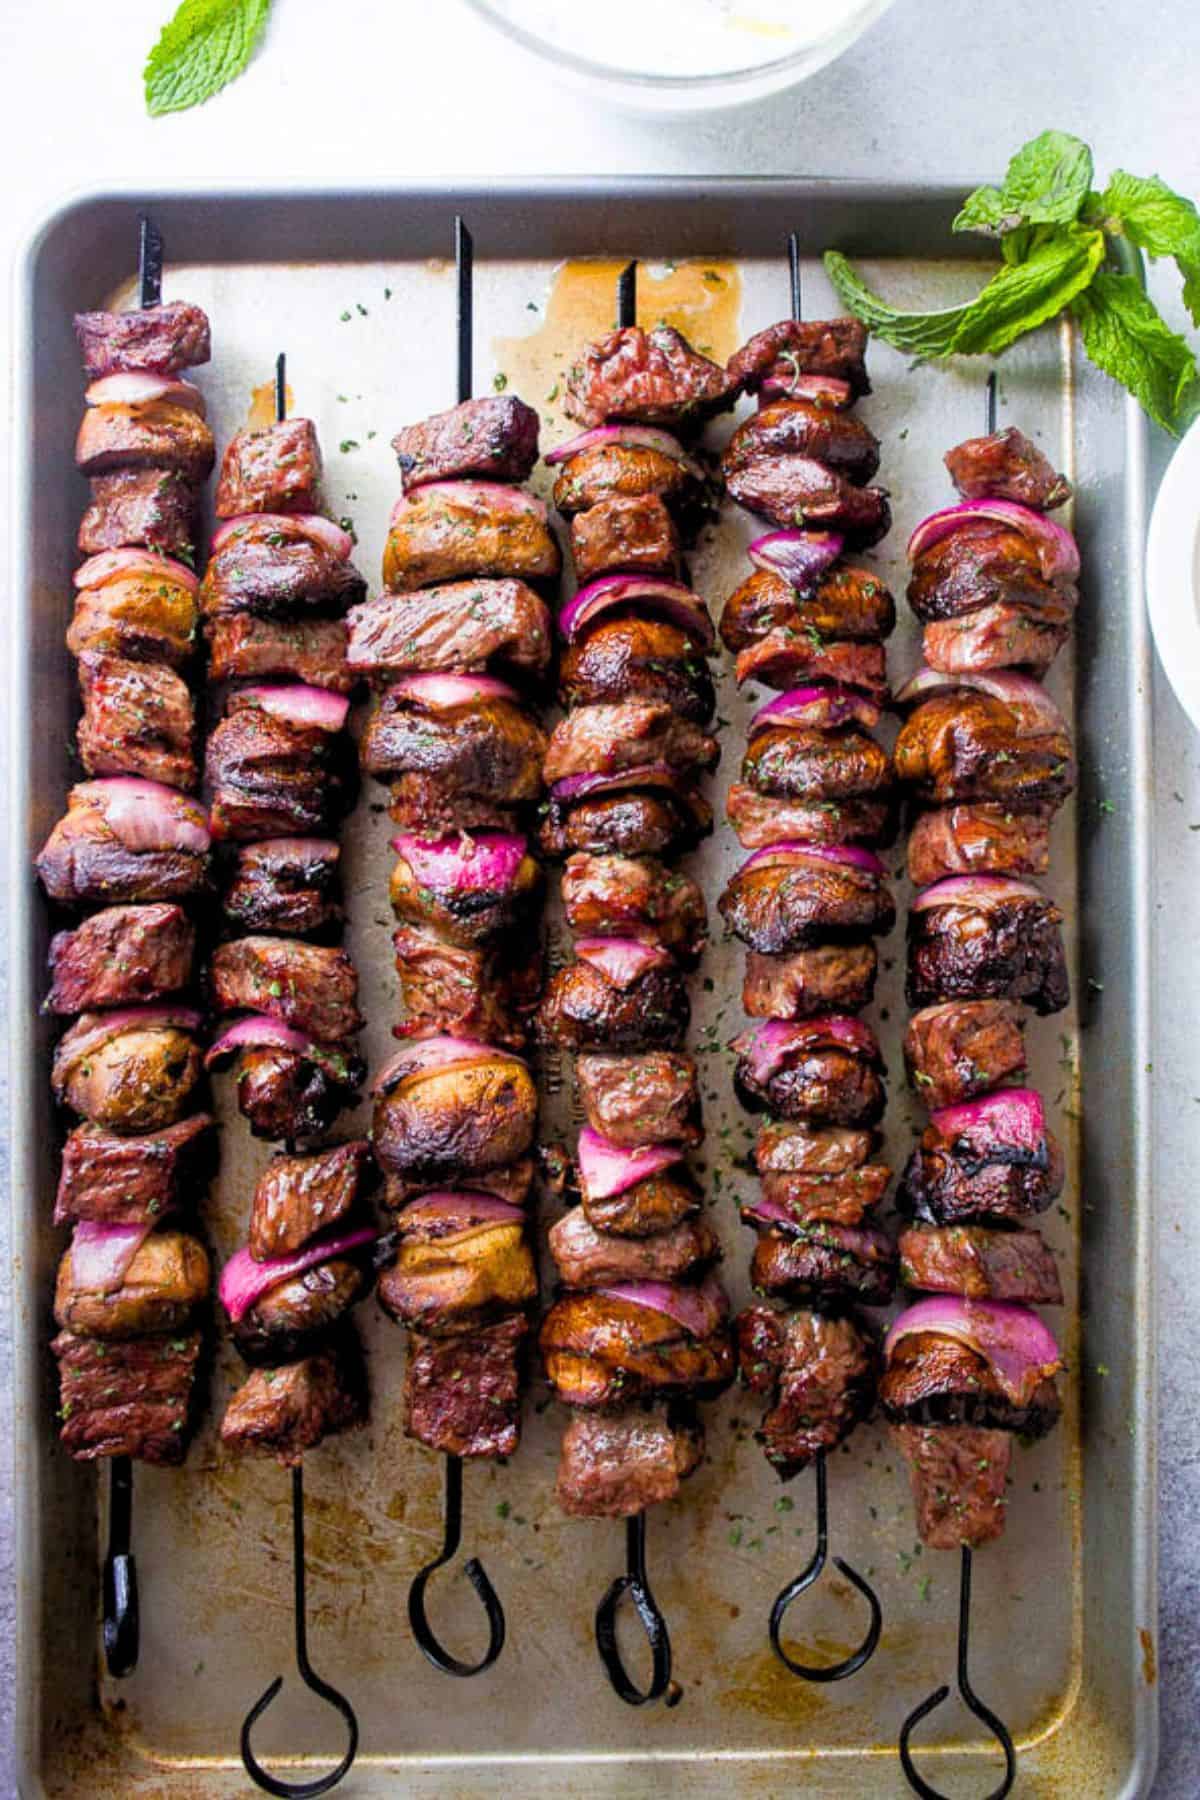 Steak kabobs threaded onto metal skewers and arranged on a rimmed baking sheet.